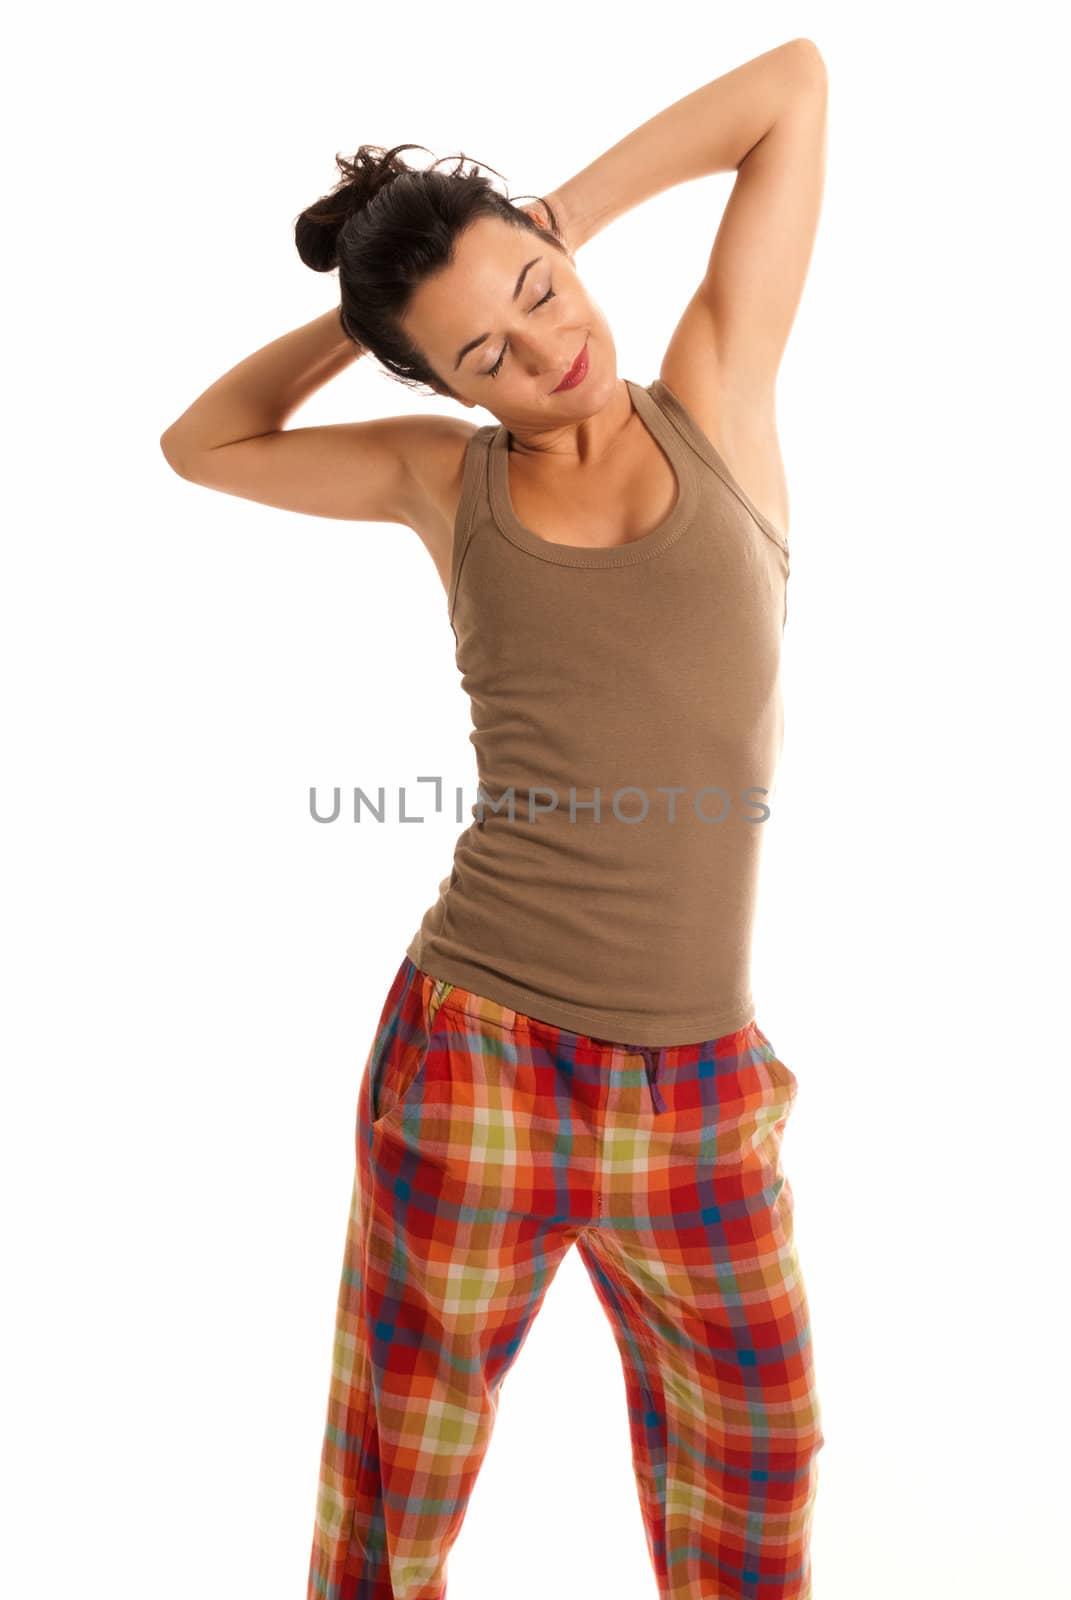 young woman be sleepy wearing pajamas isolated on white background by dgmata